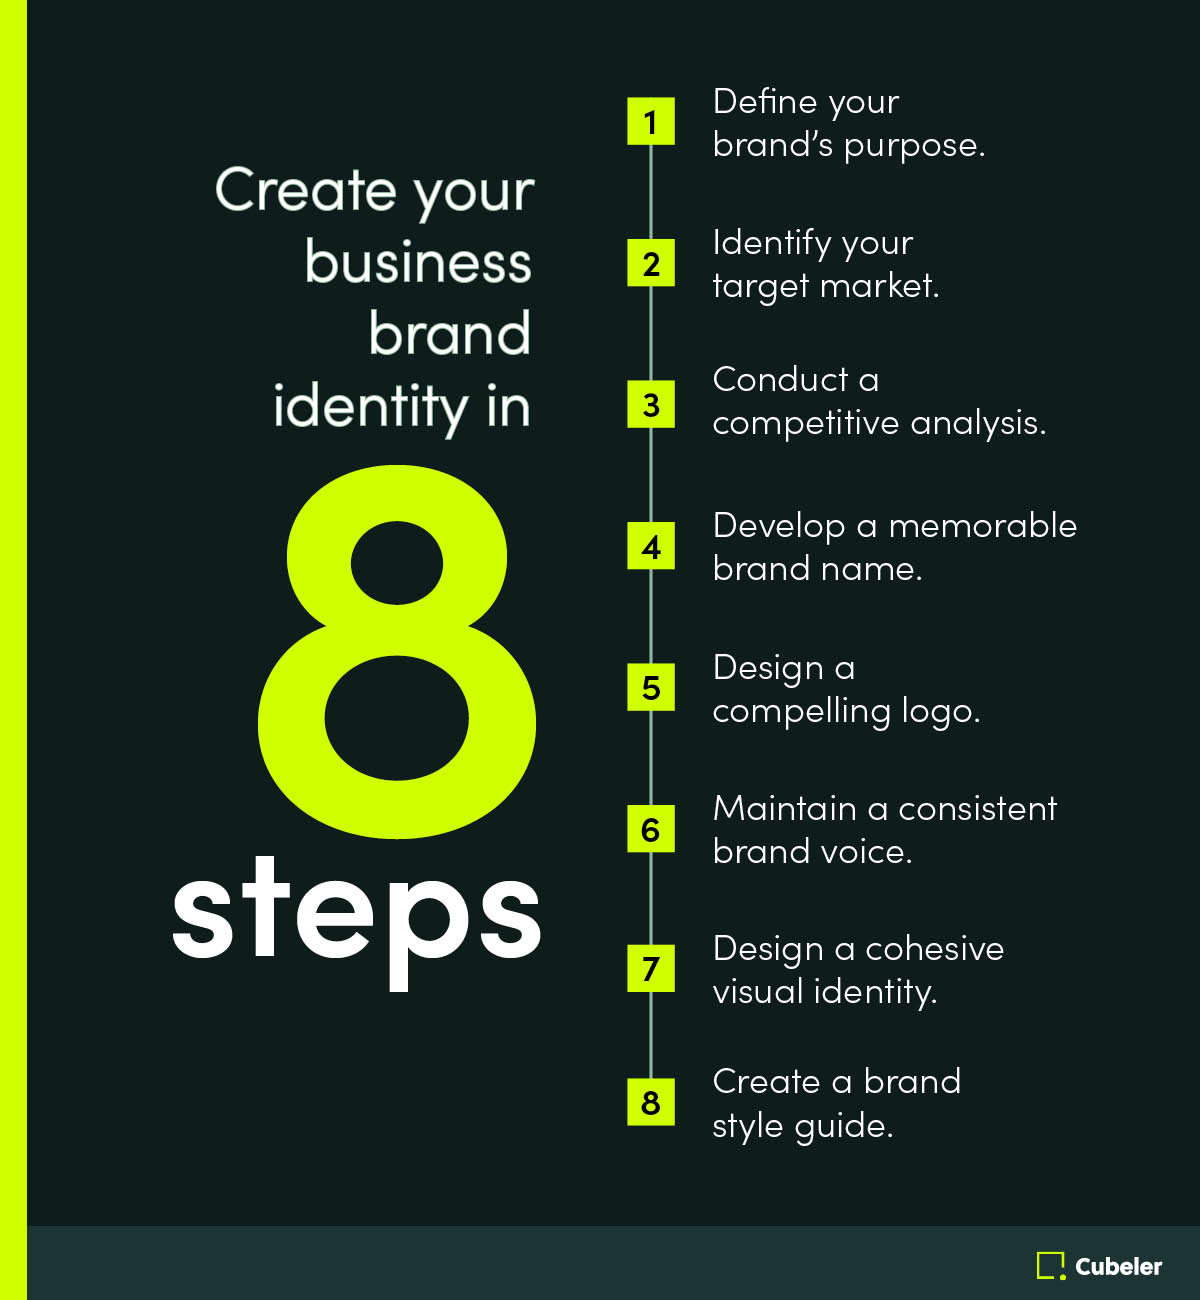 Create your business brand identity in 8 steps